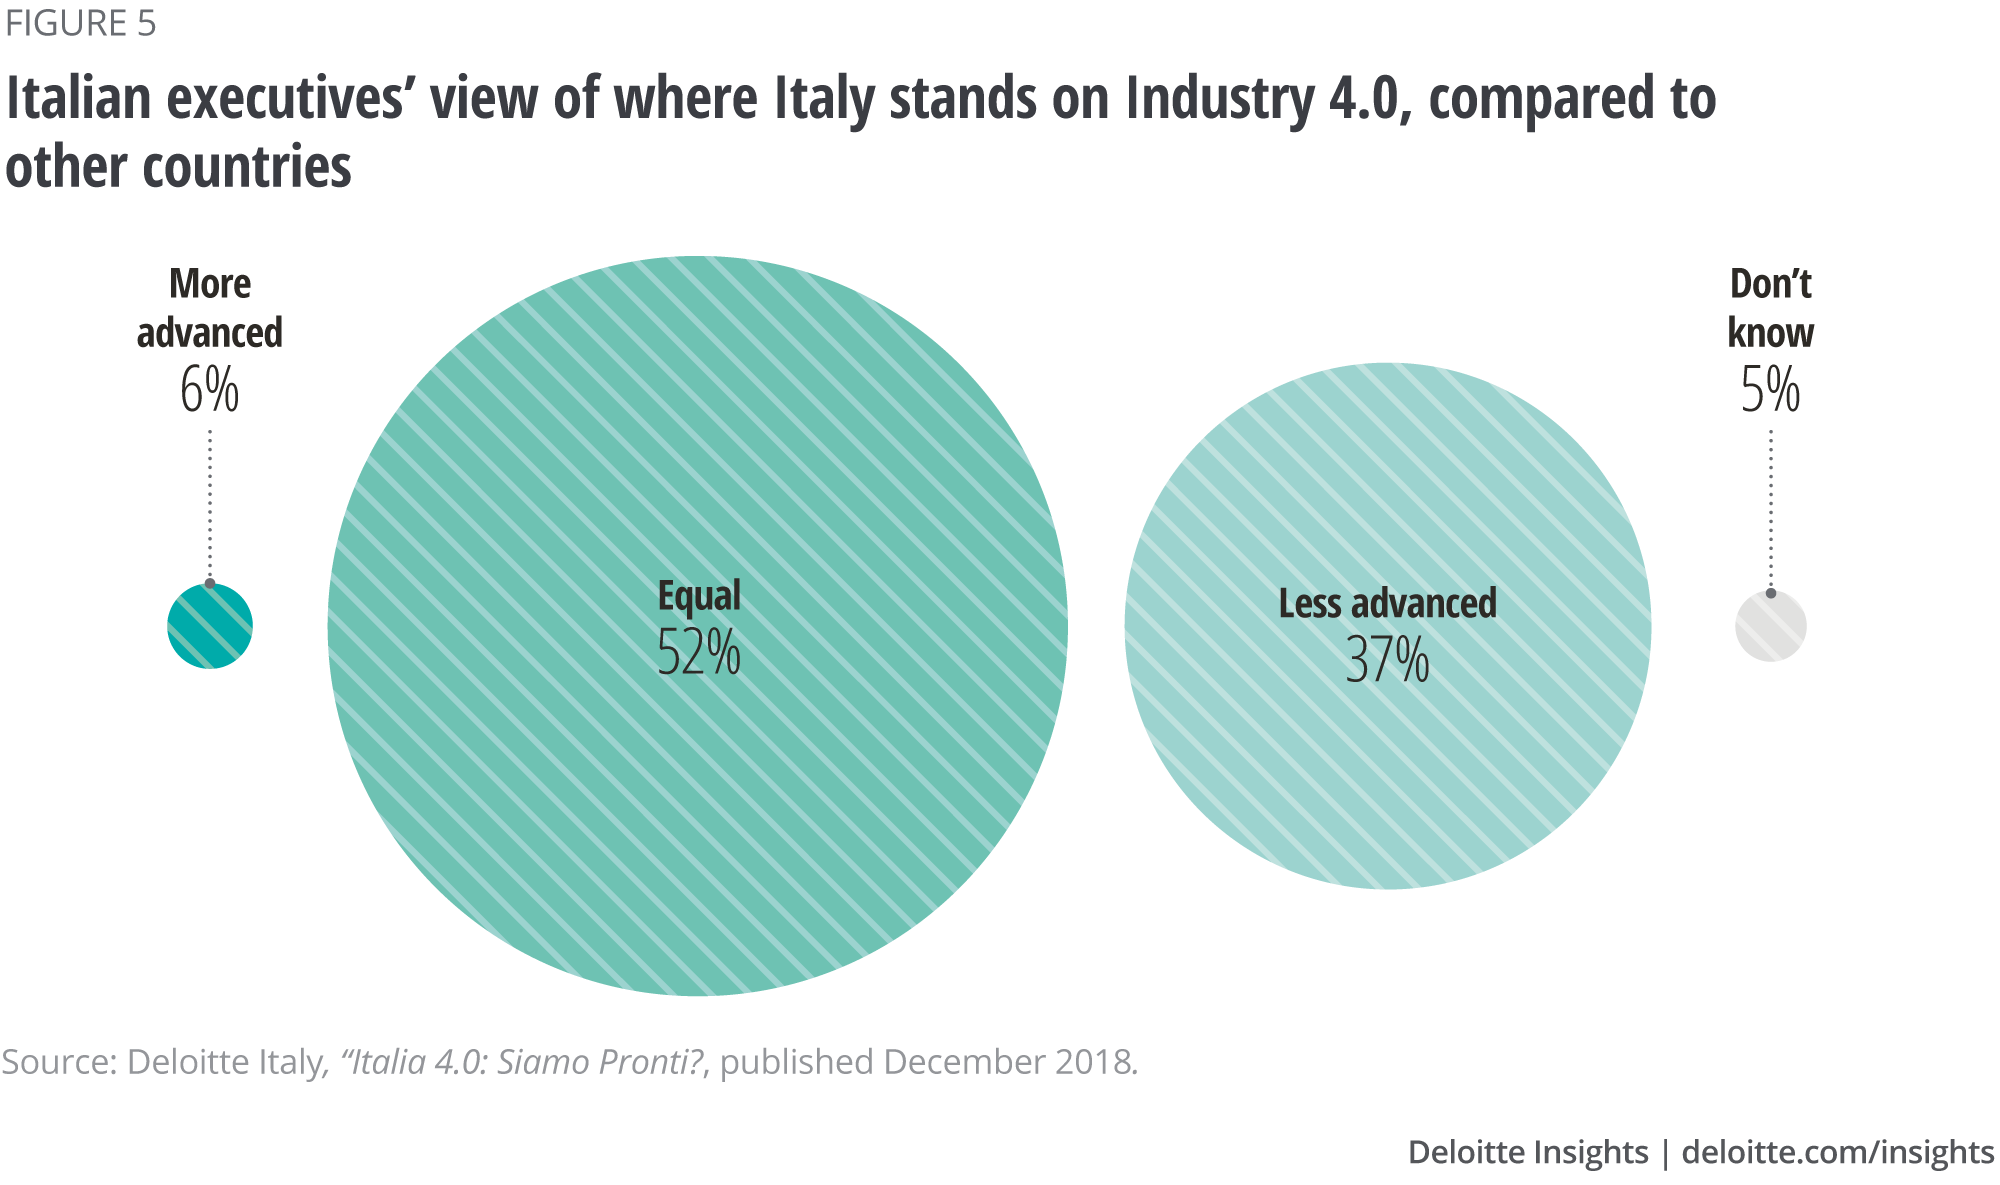 Italian executives' view of where Italy stands on Industry 4.0, compared to other countries